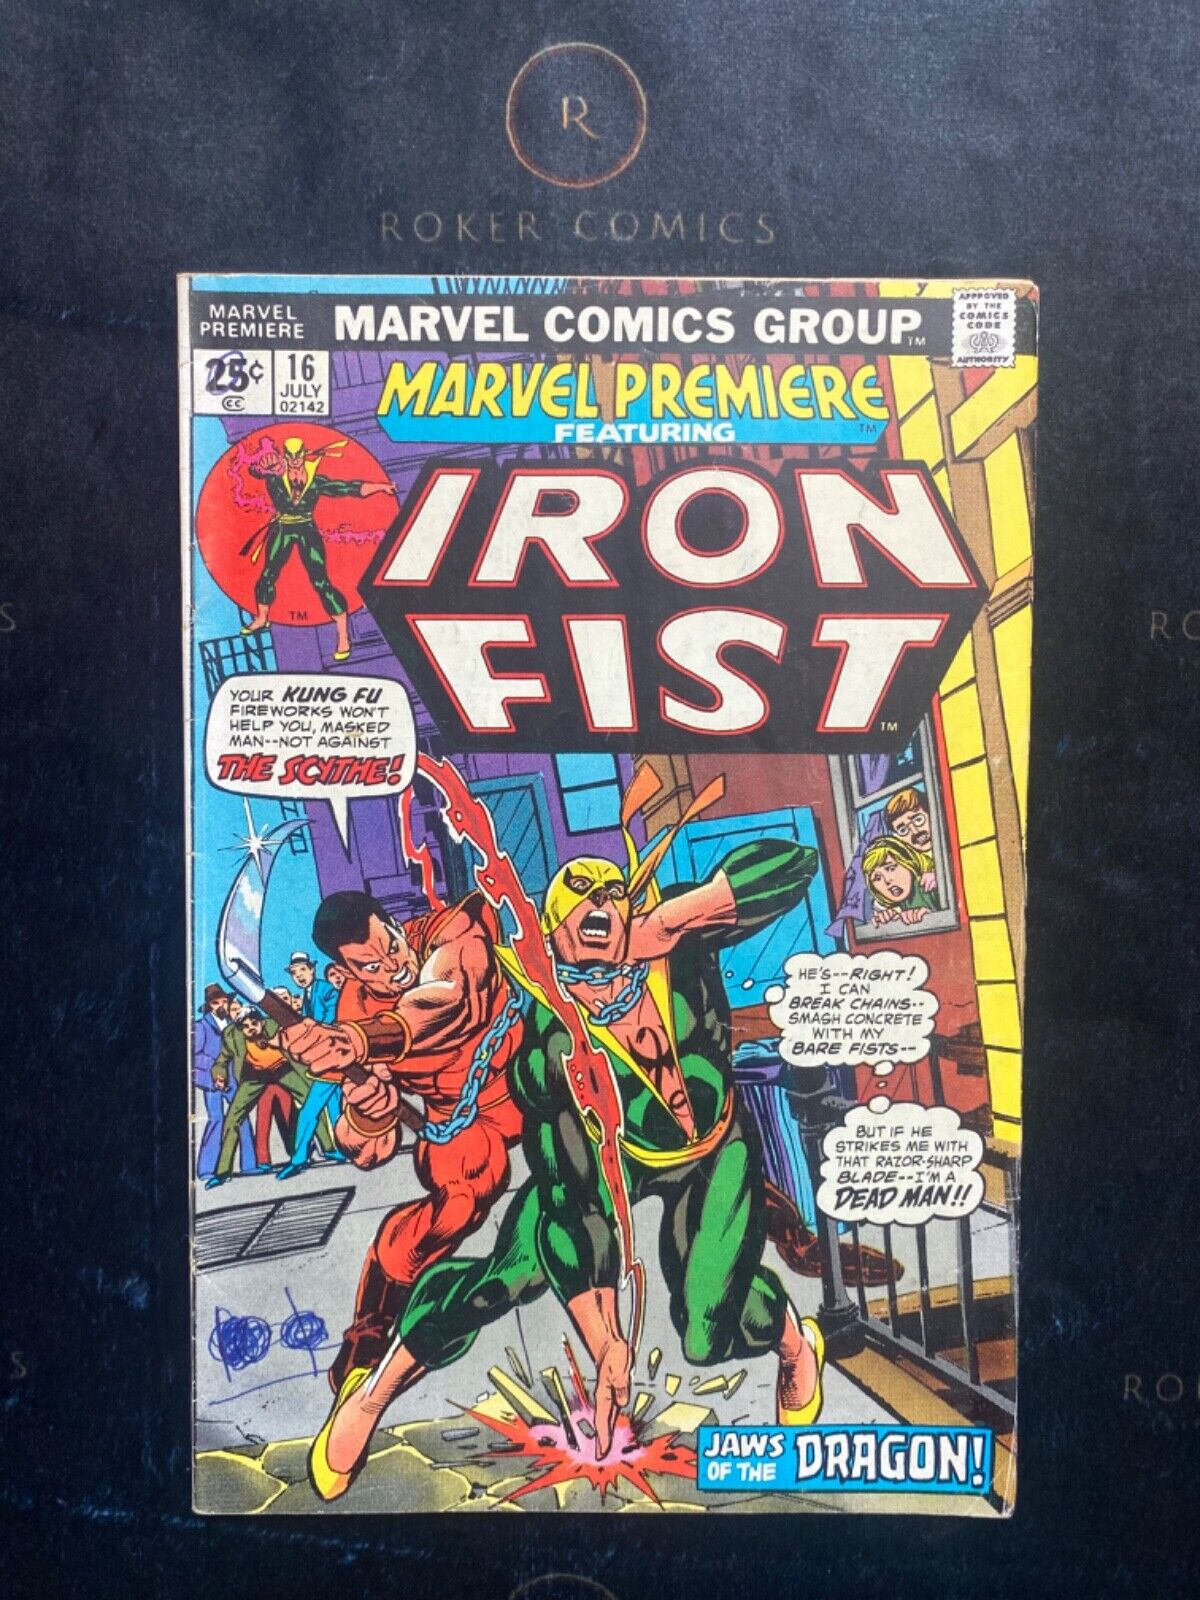 RARE 1974 Marvel Premiere #16 KEY ISSUE: Second Appearance of Iron Fist